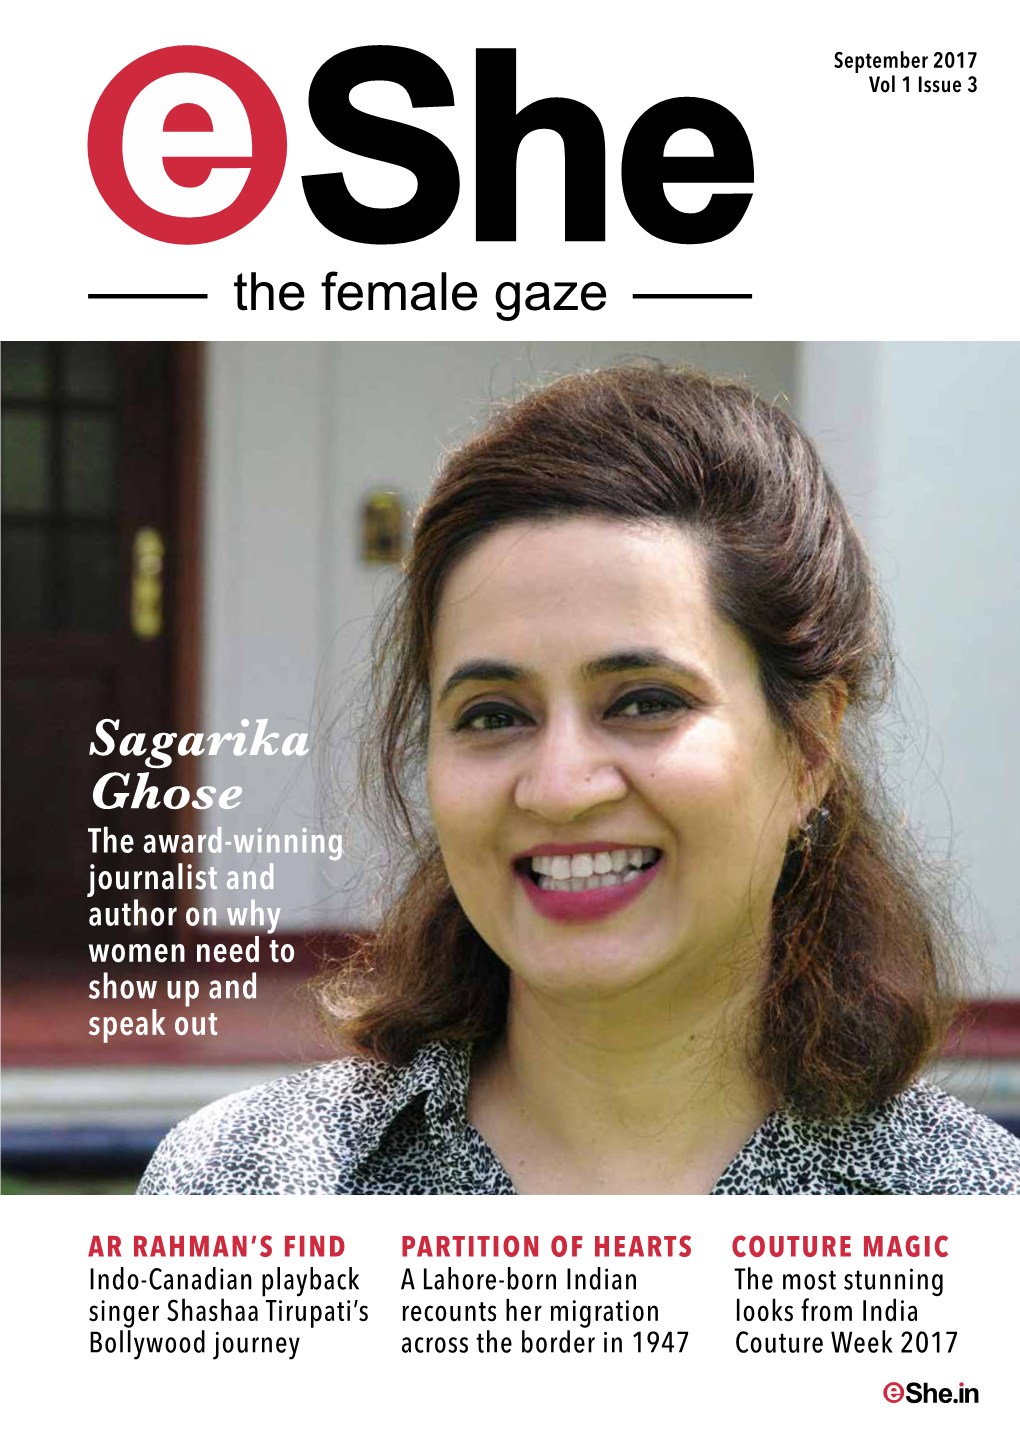 Sagarika Ghose the Award-Winning Journalist and Author on Why Women Need to Show up and Speak Out